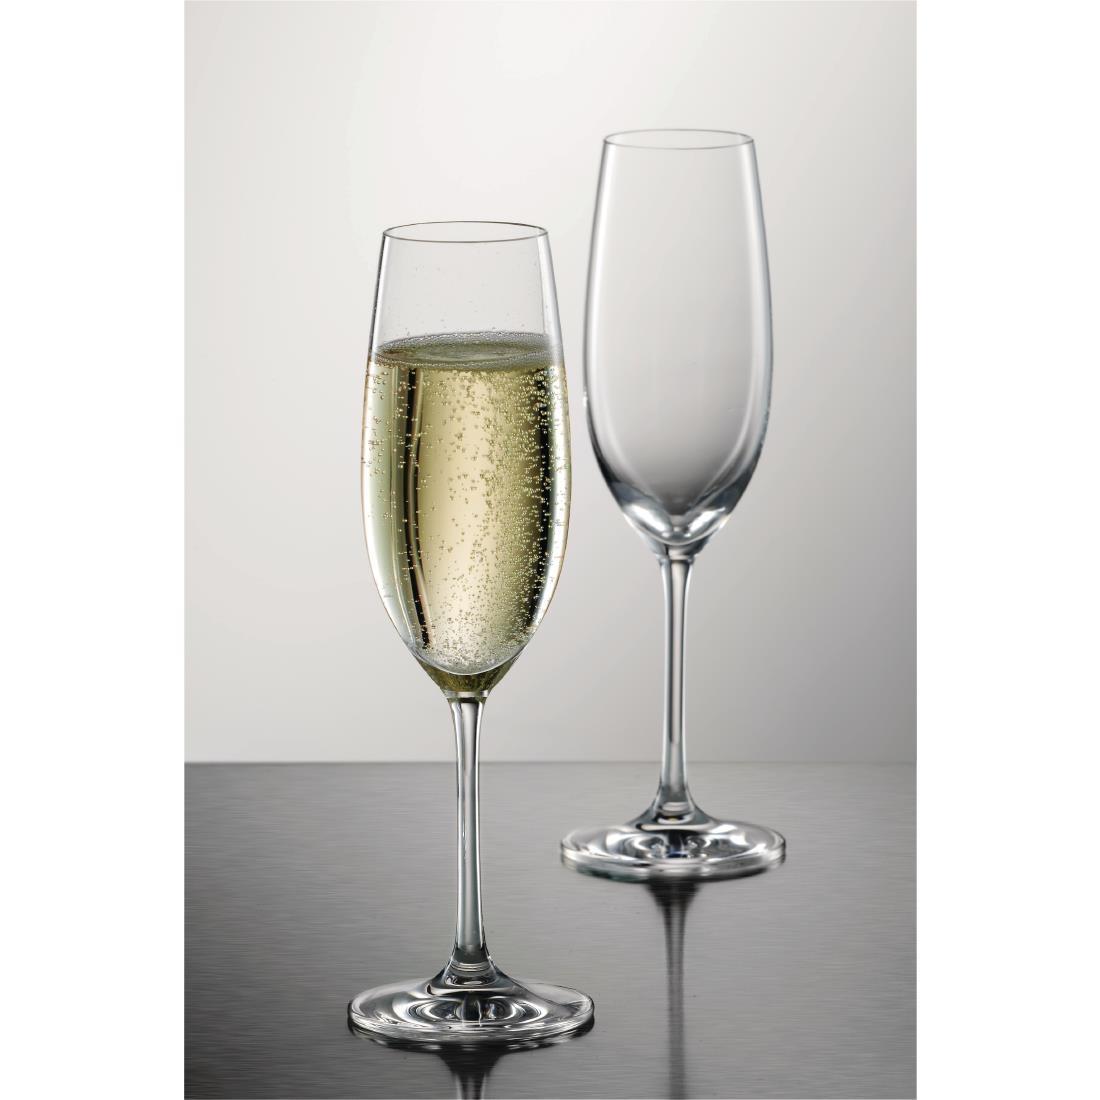 Schott Zwiesel Ivento Champagne flute 230ml (Pack of 6) - GL137  - 2